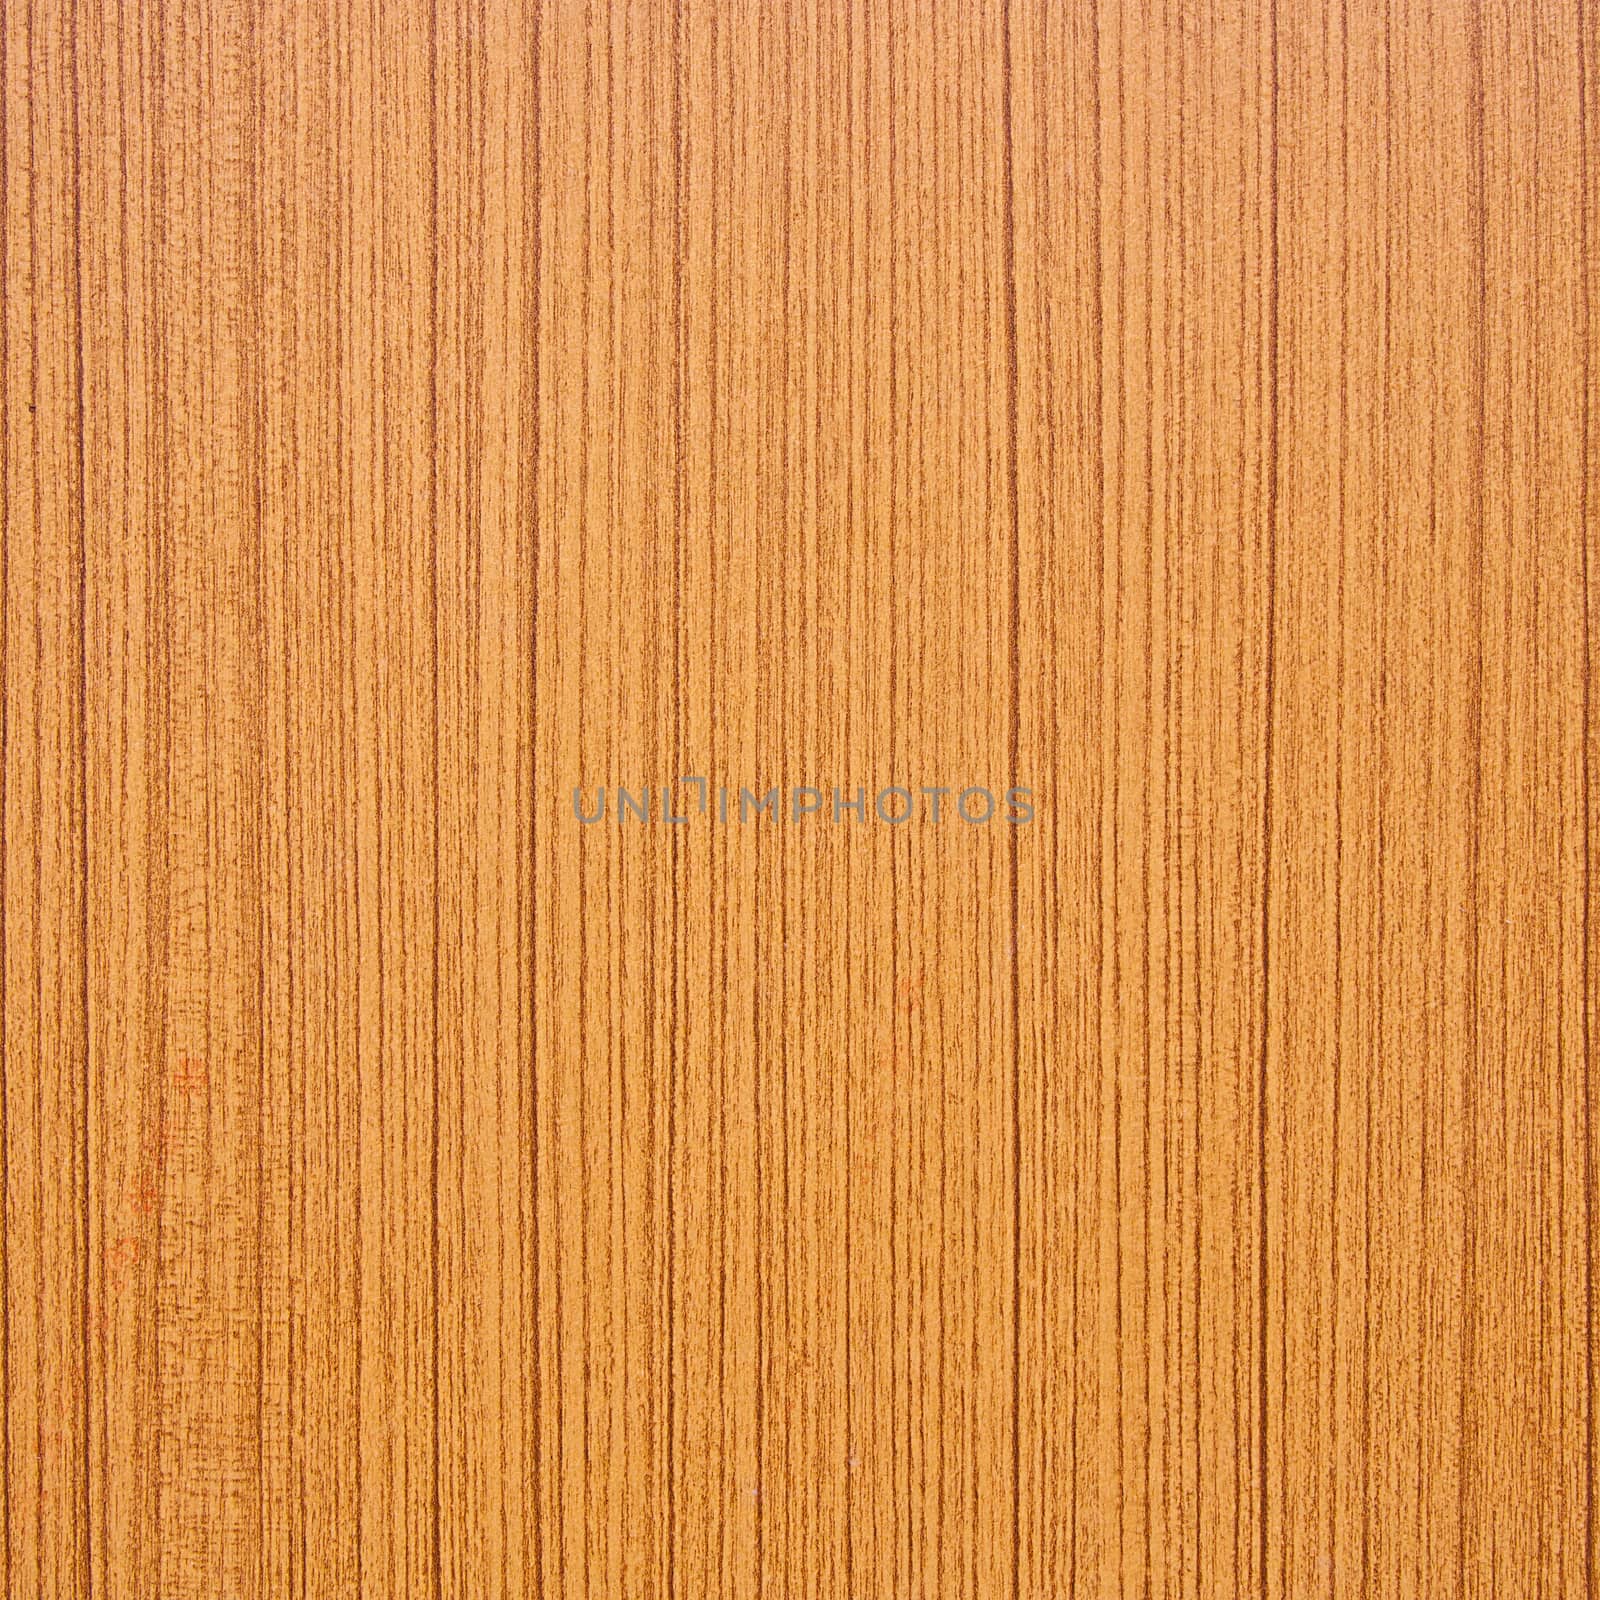 Texture of wood for background